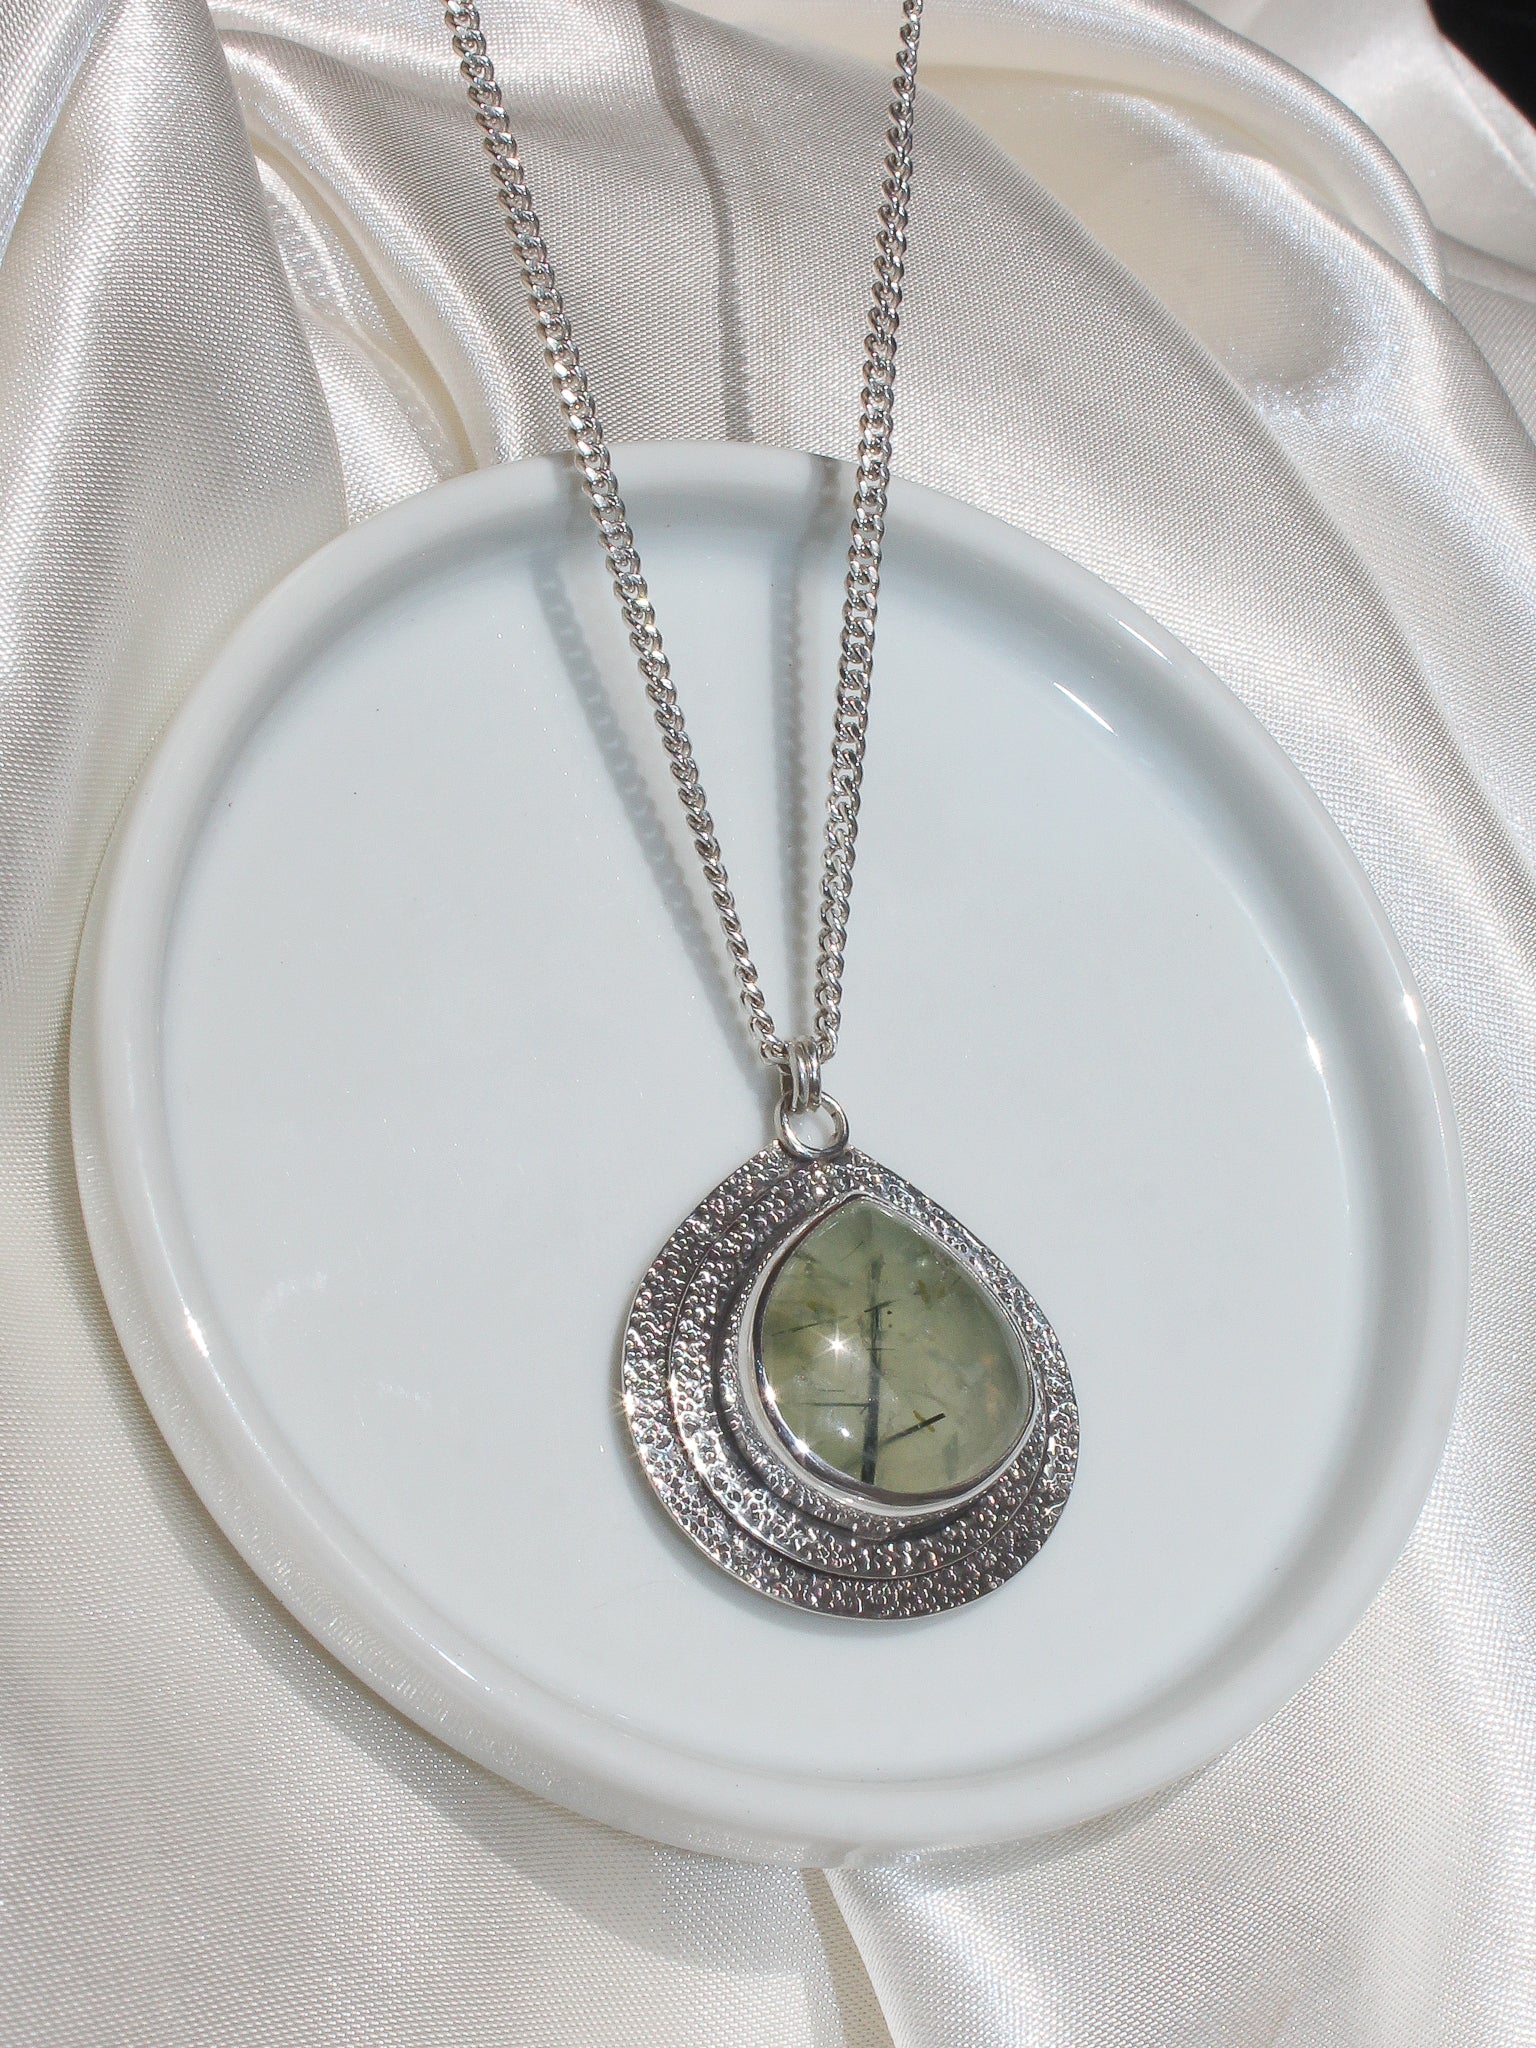 Handmade 925 sterling silver pendant with prehnite stone with black tourmaline inclusions unique handcrafted setting lily and William jewelry 